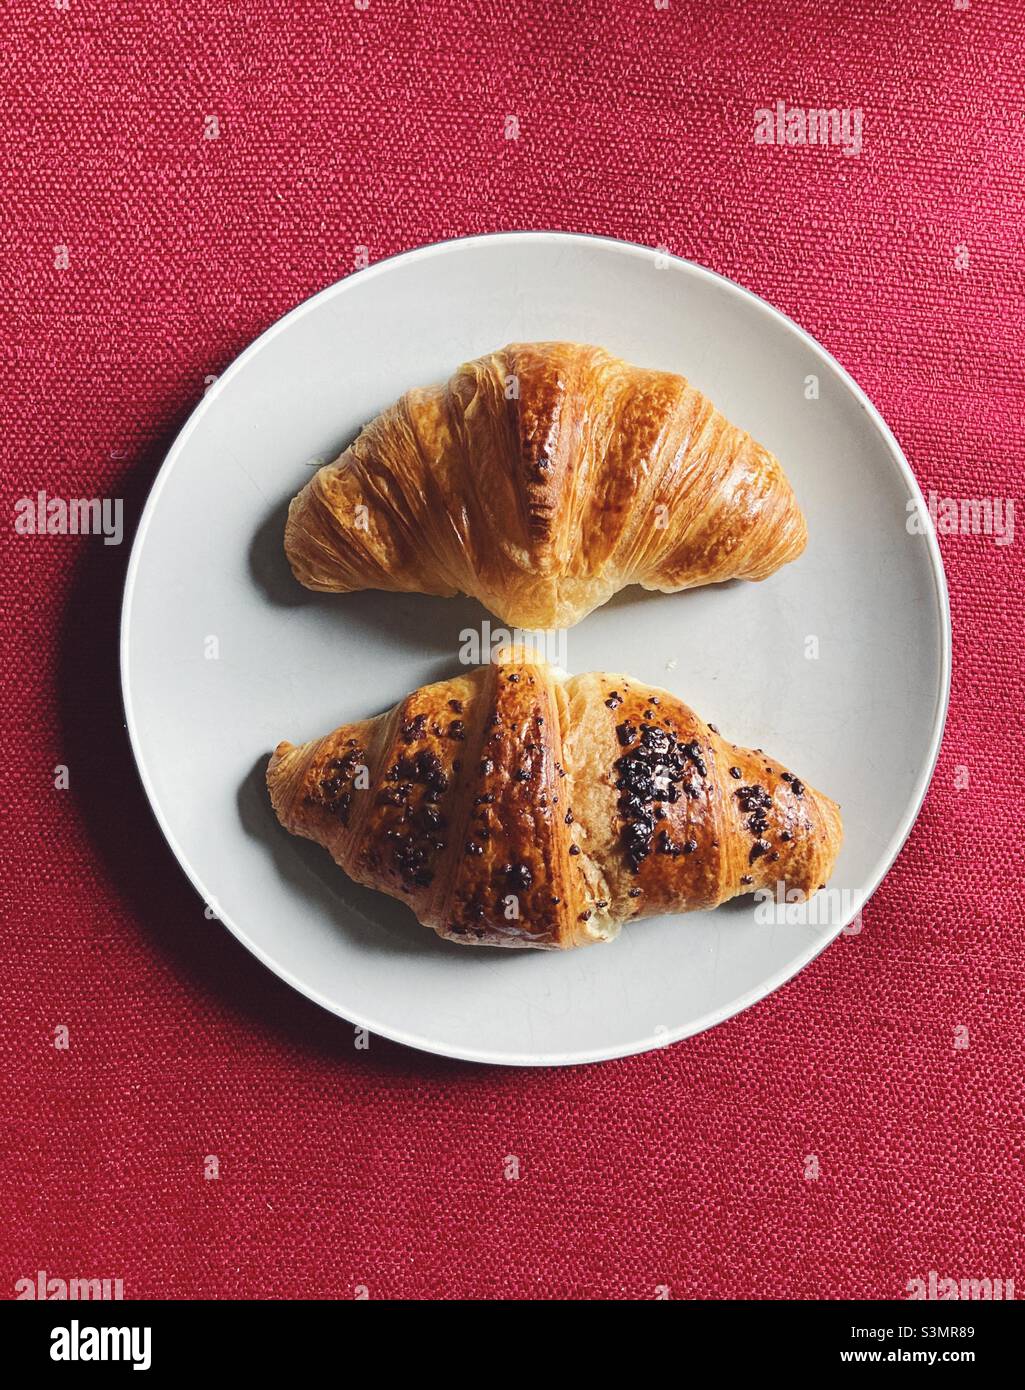 One plain and one chocolate croissant on a plate on a red cloth tablecloth Stock Photo